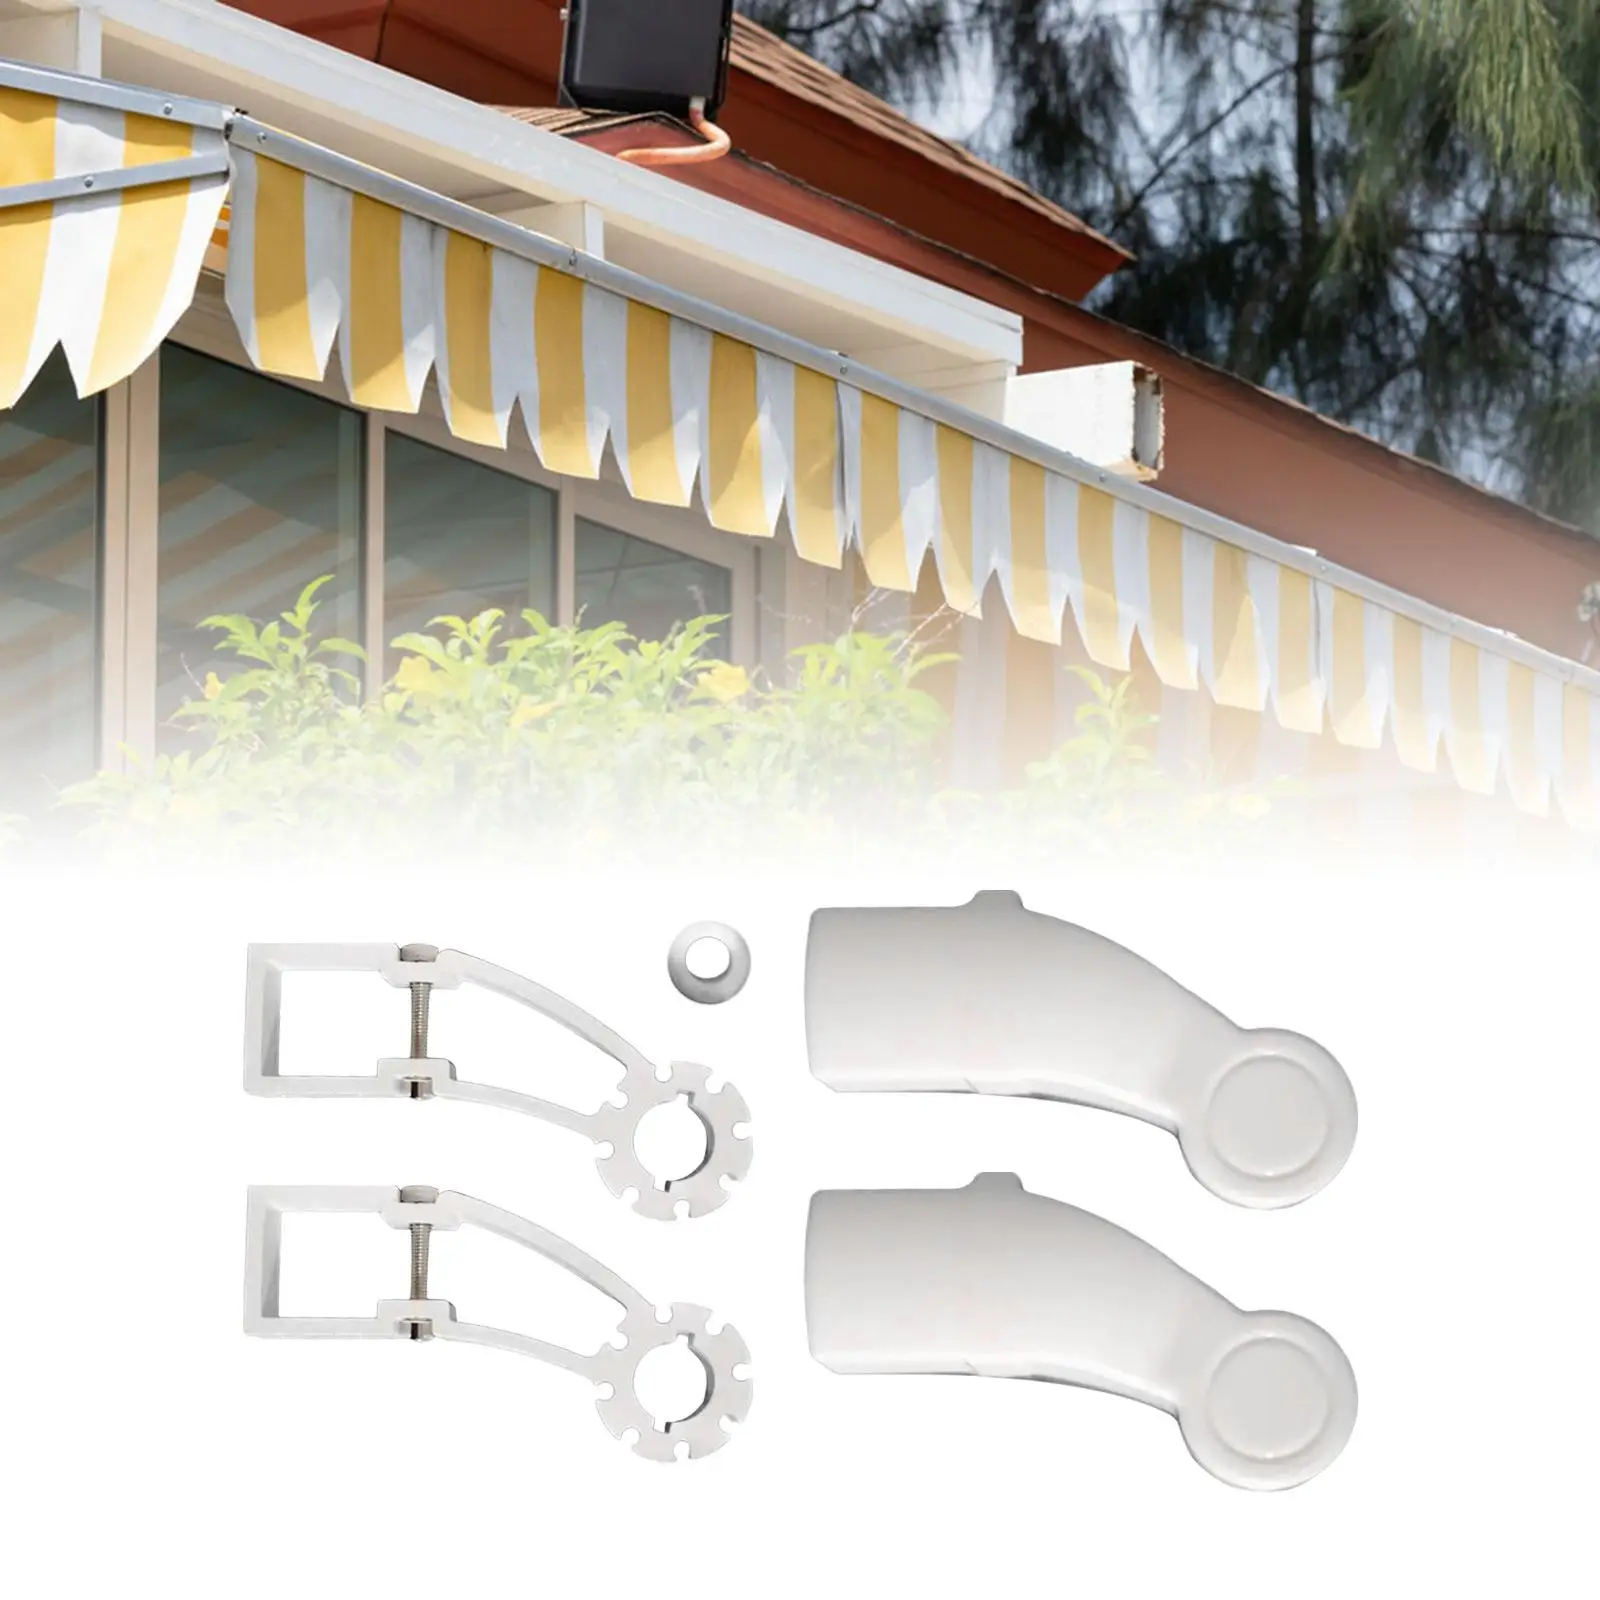 Awning Brackets suits 40mm Square Tube Durable White Easy to Install Awning Gearbox Brackets Accessories for Trailer Camper RV